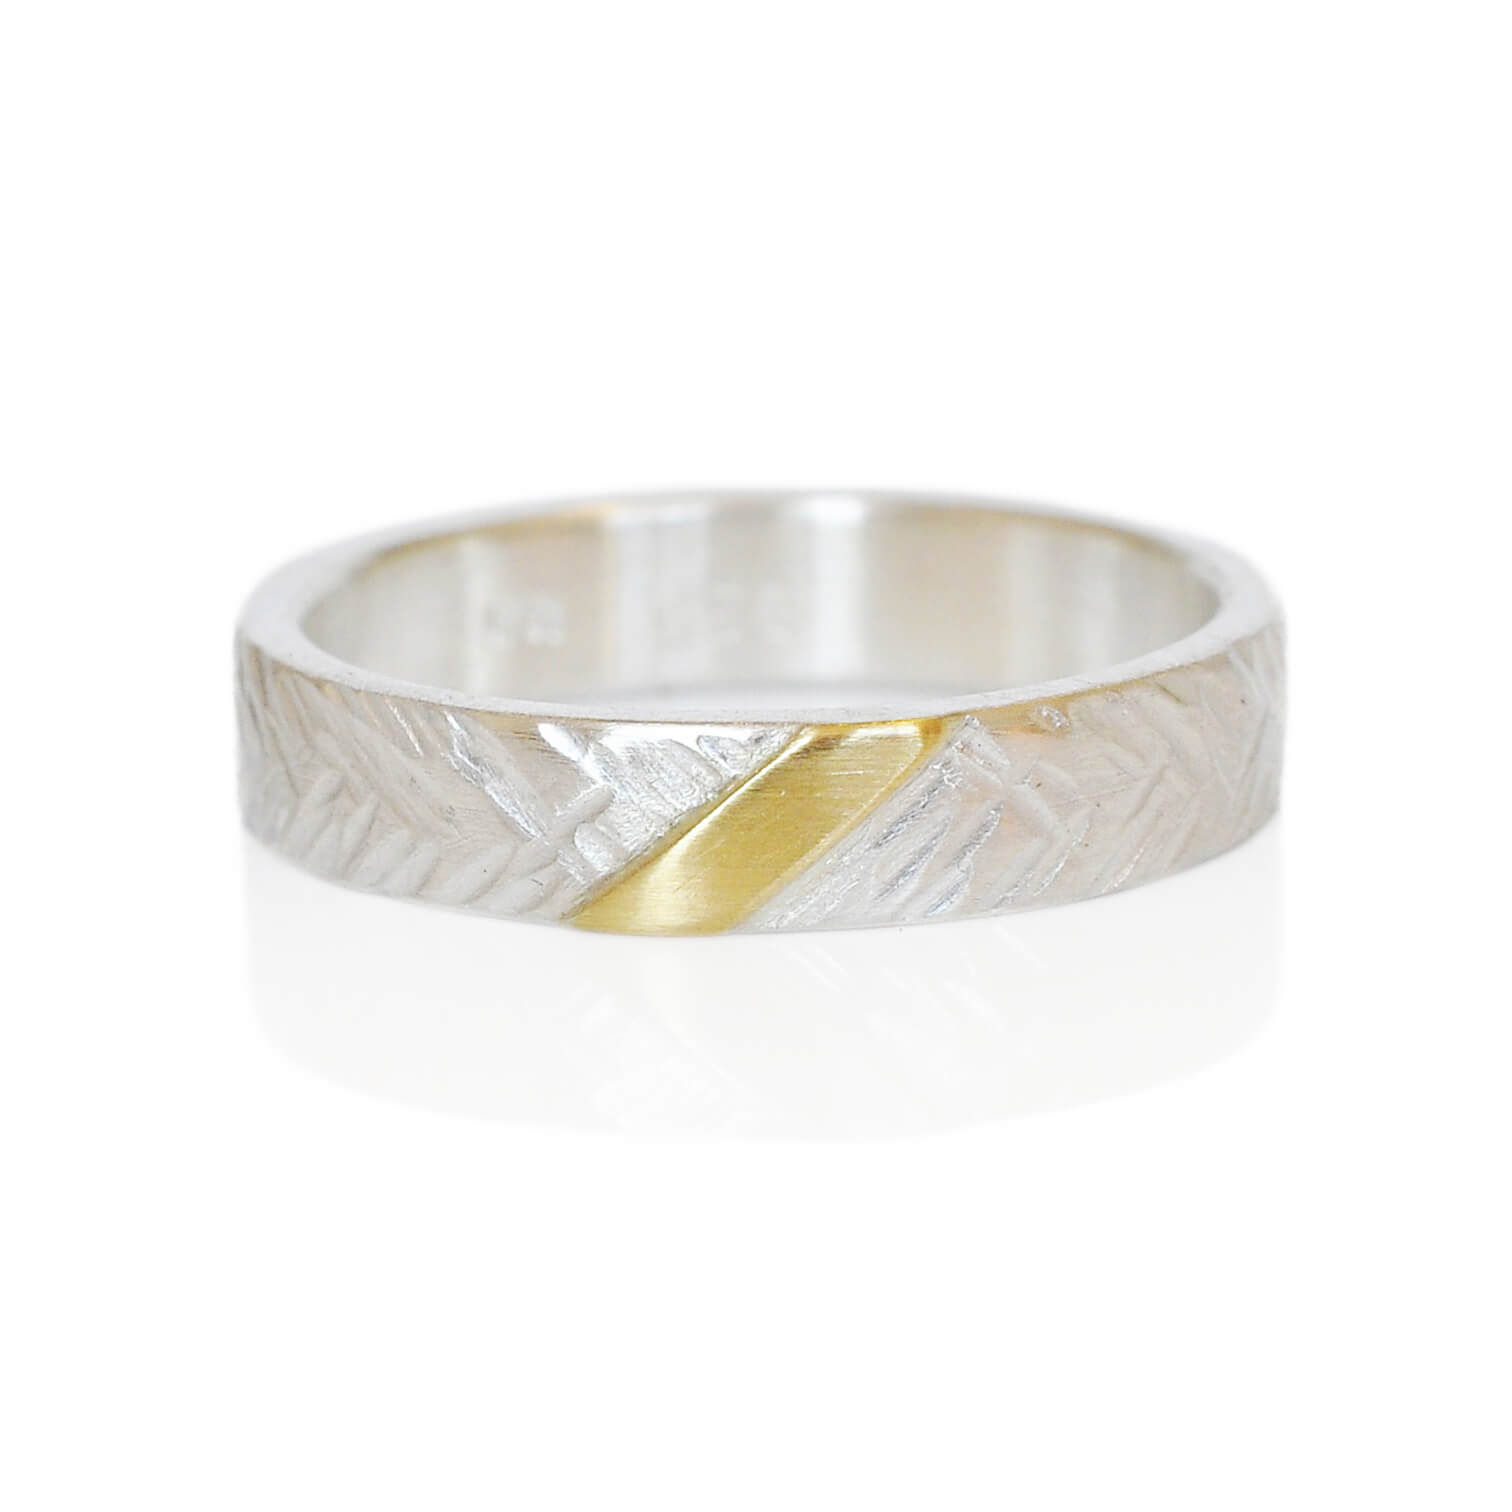 Hammered sterling silver yellow gold wedding band. Handmade with recycled metal.